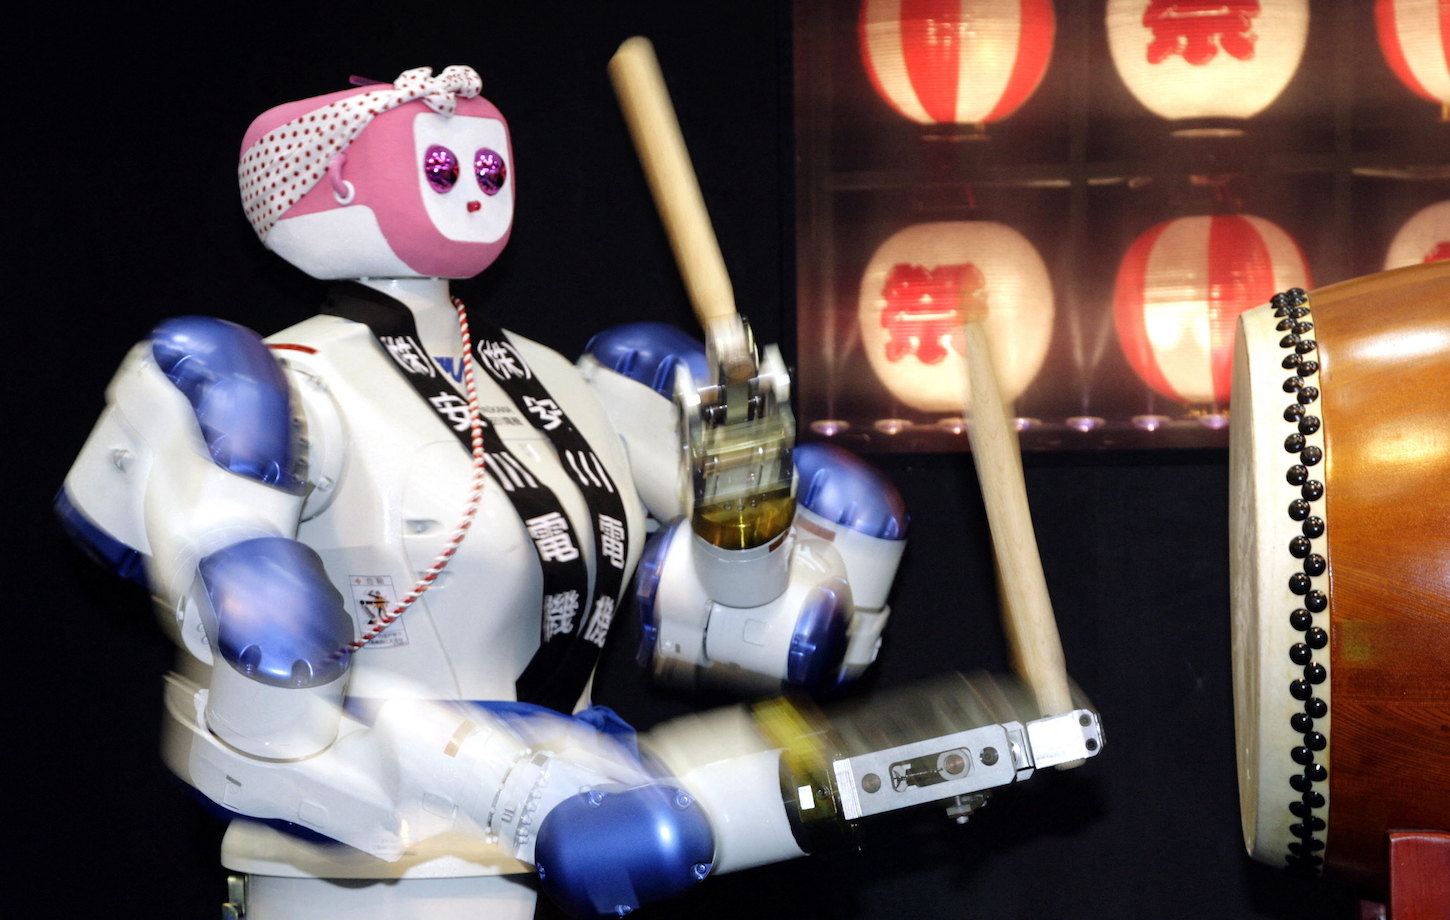 "Motoman" robots from Japan's largest industrial robot maker Yasukawa Electric, beats a drum during a demonstration at the International Robot Exhibition in Tokyo, 29 November 2007.